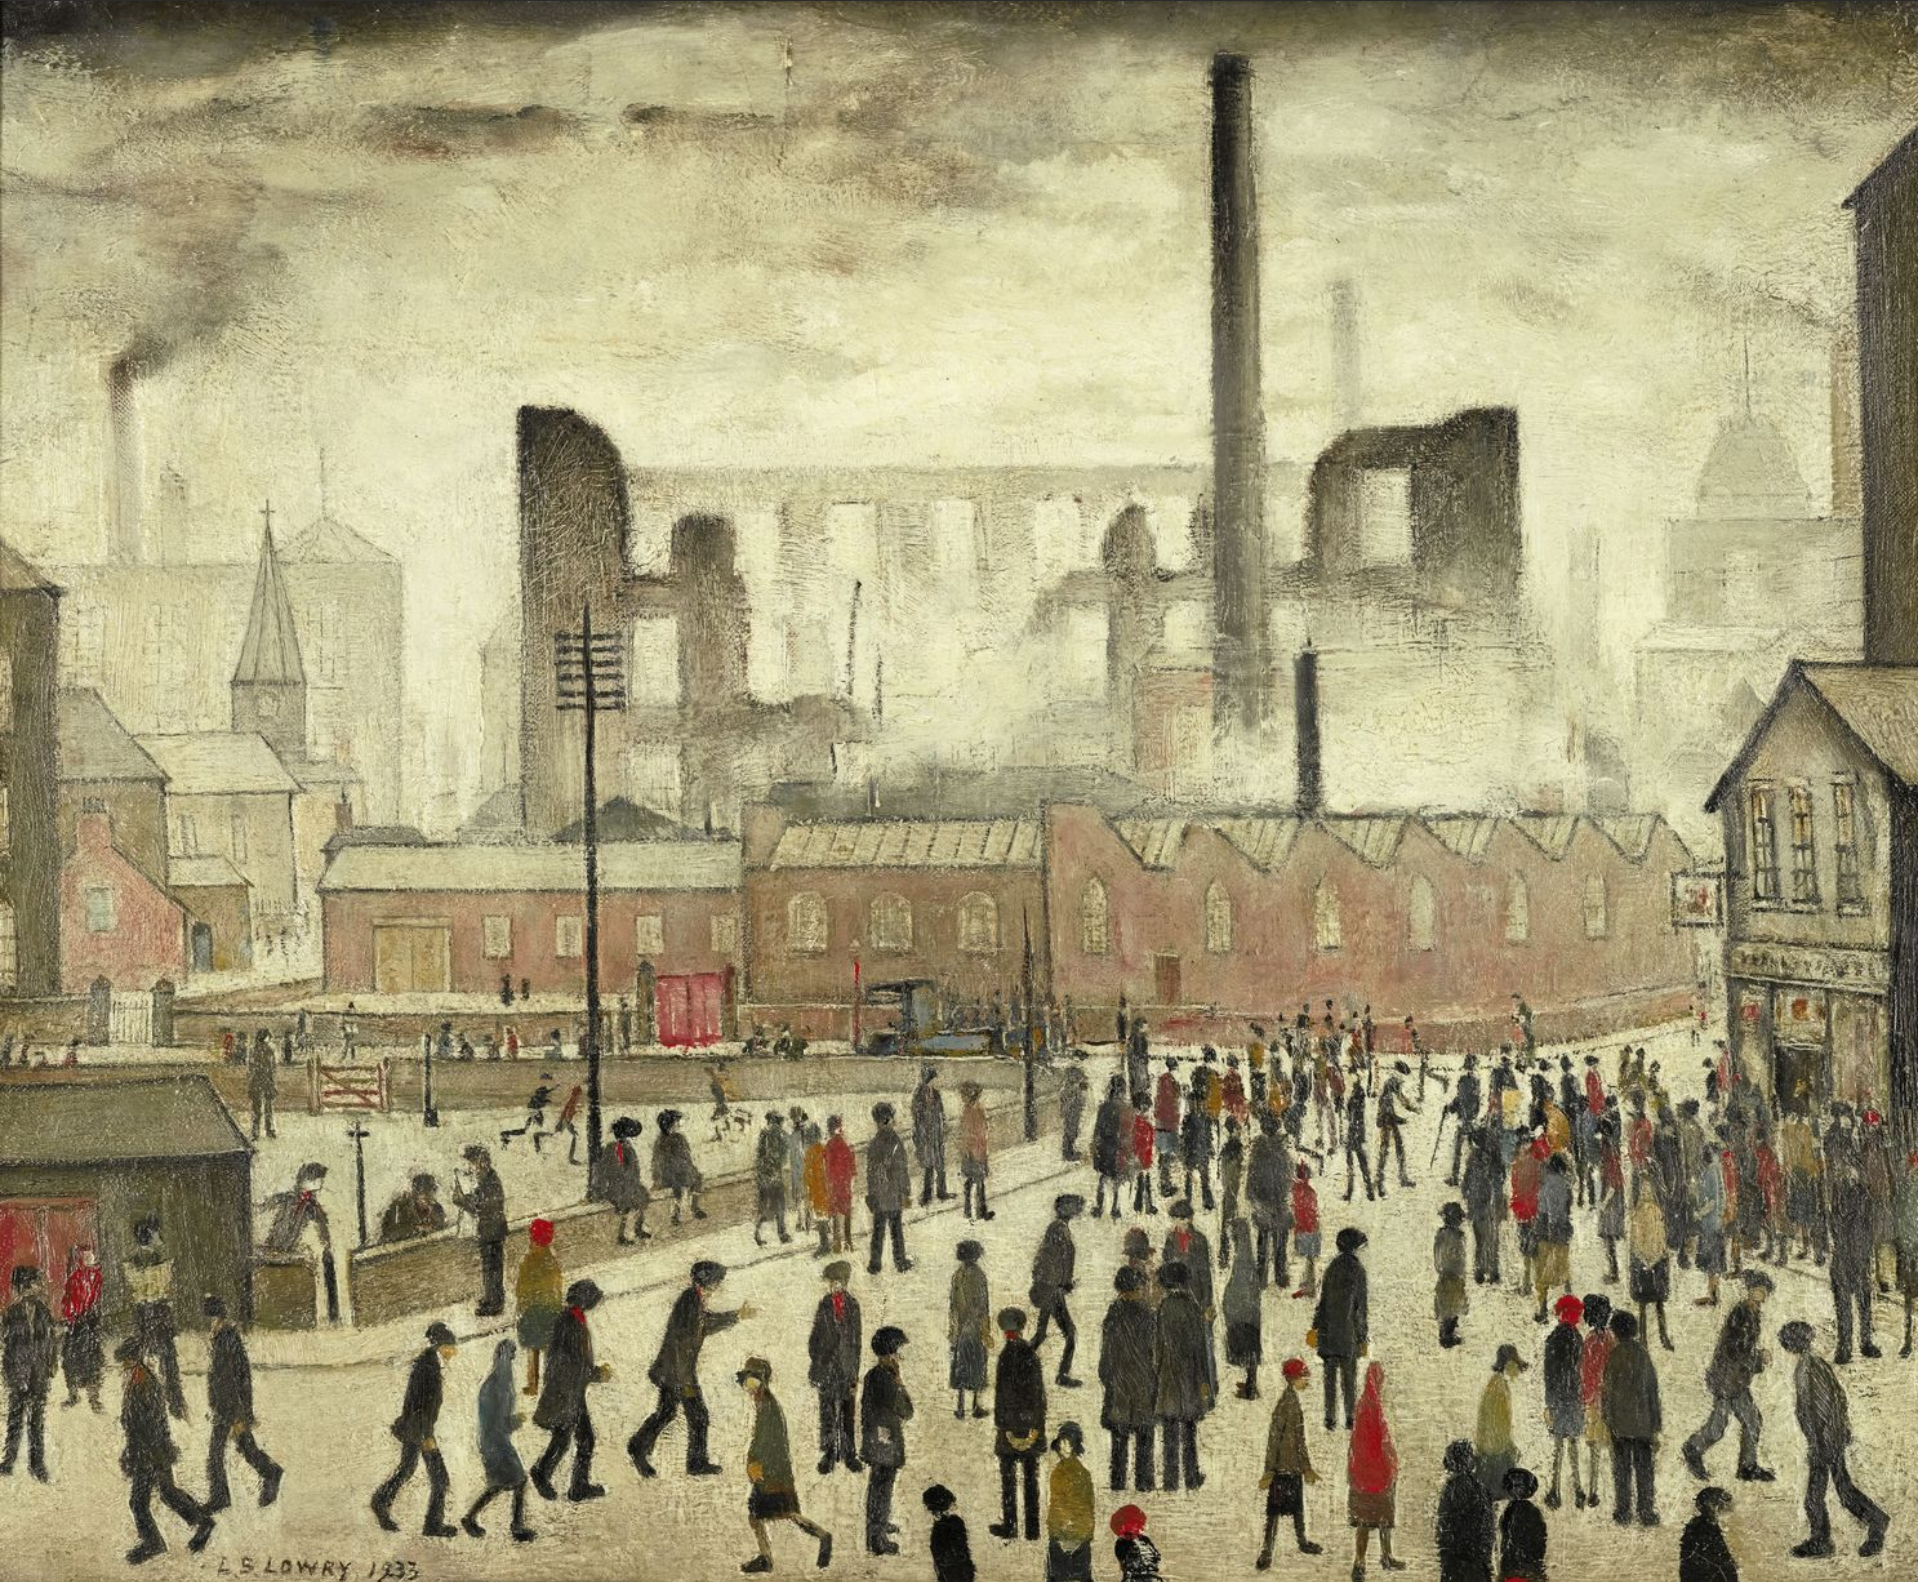 After the Fire (1933) by Laurence Stephen Lowry (1887 - 1976), English artist.